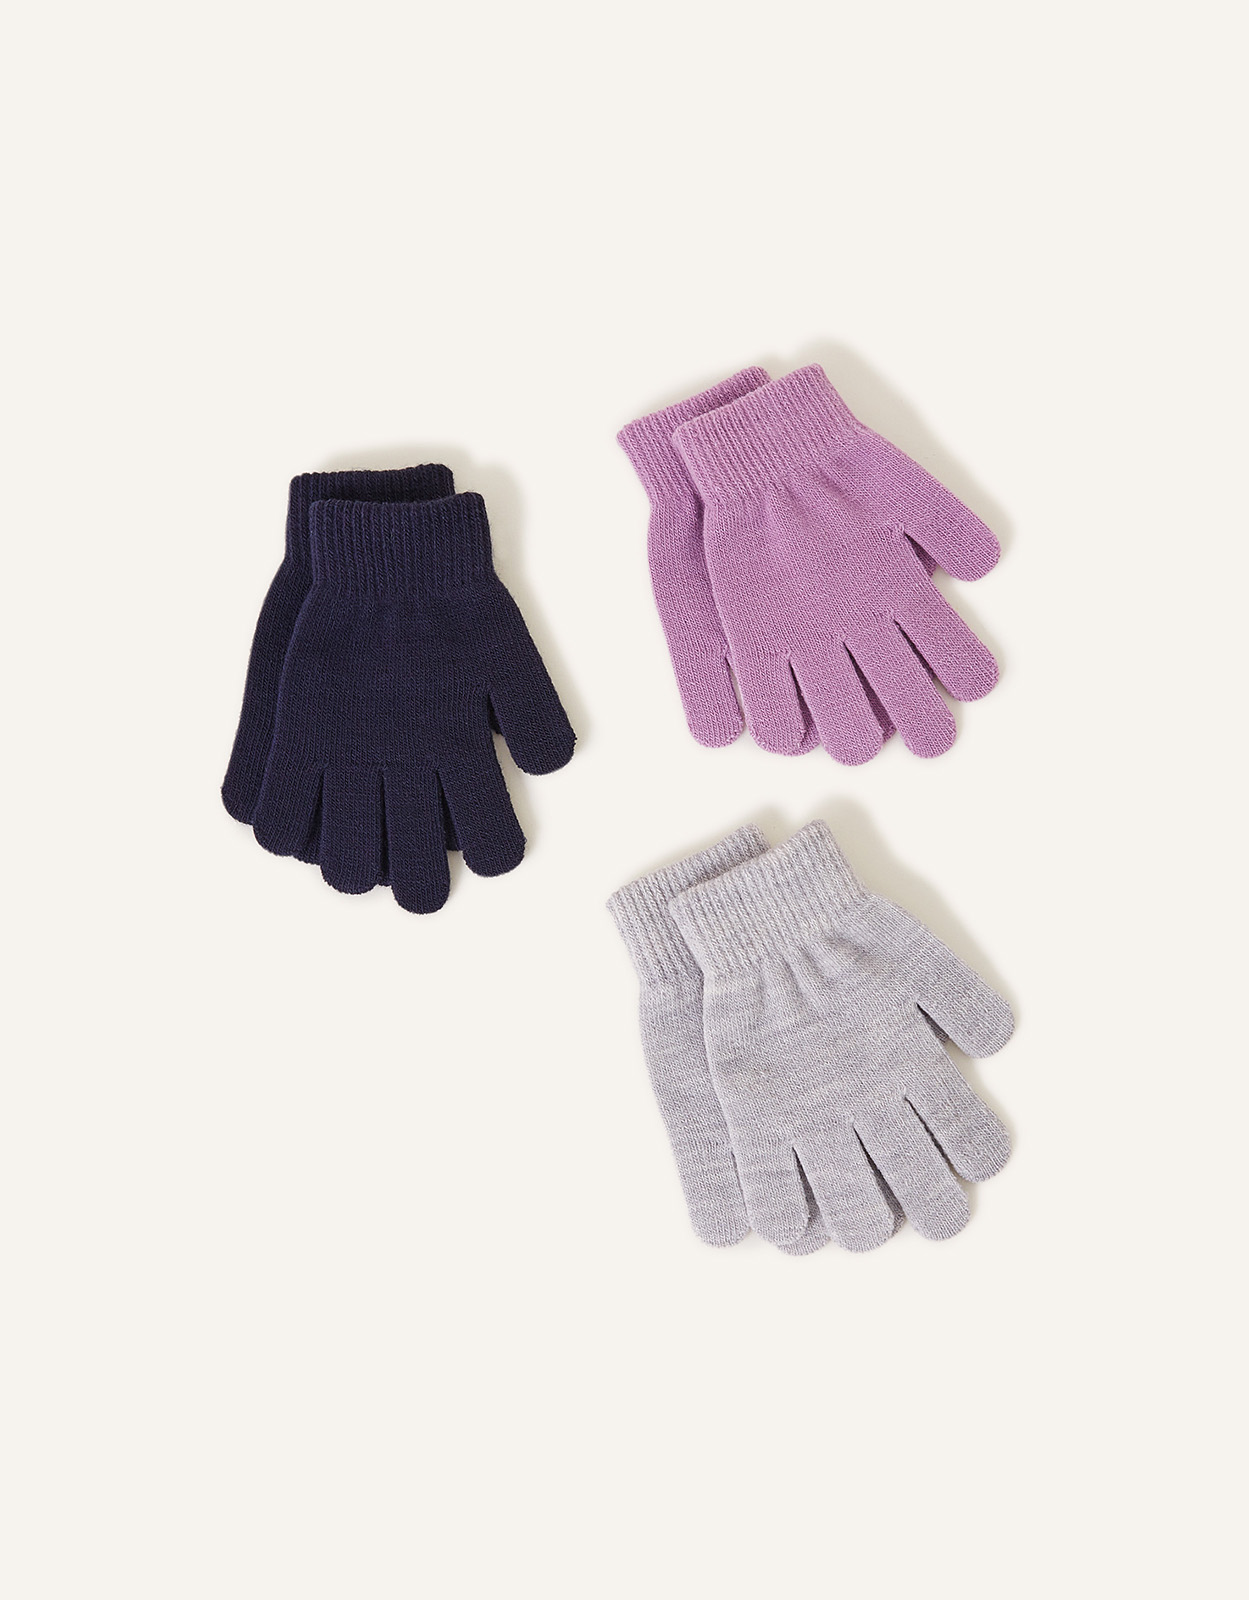 Accessorize Little Girl's Girls Gloves Set of Three Multi, Size: 3-5 yrs